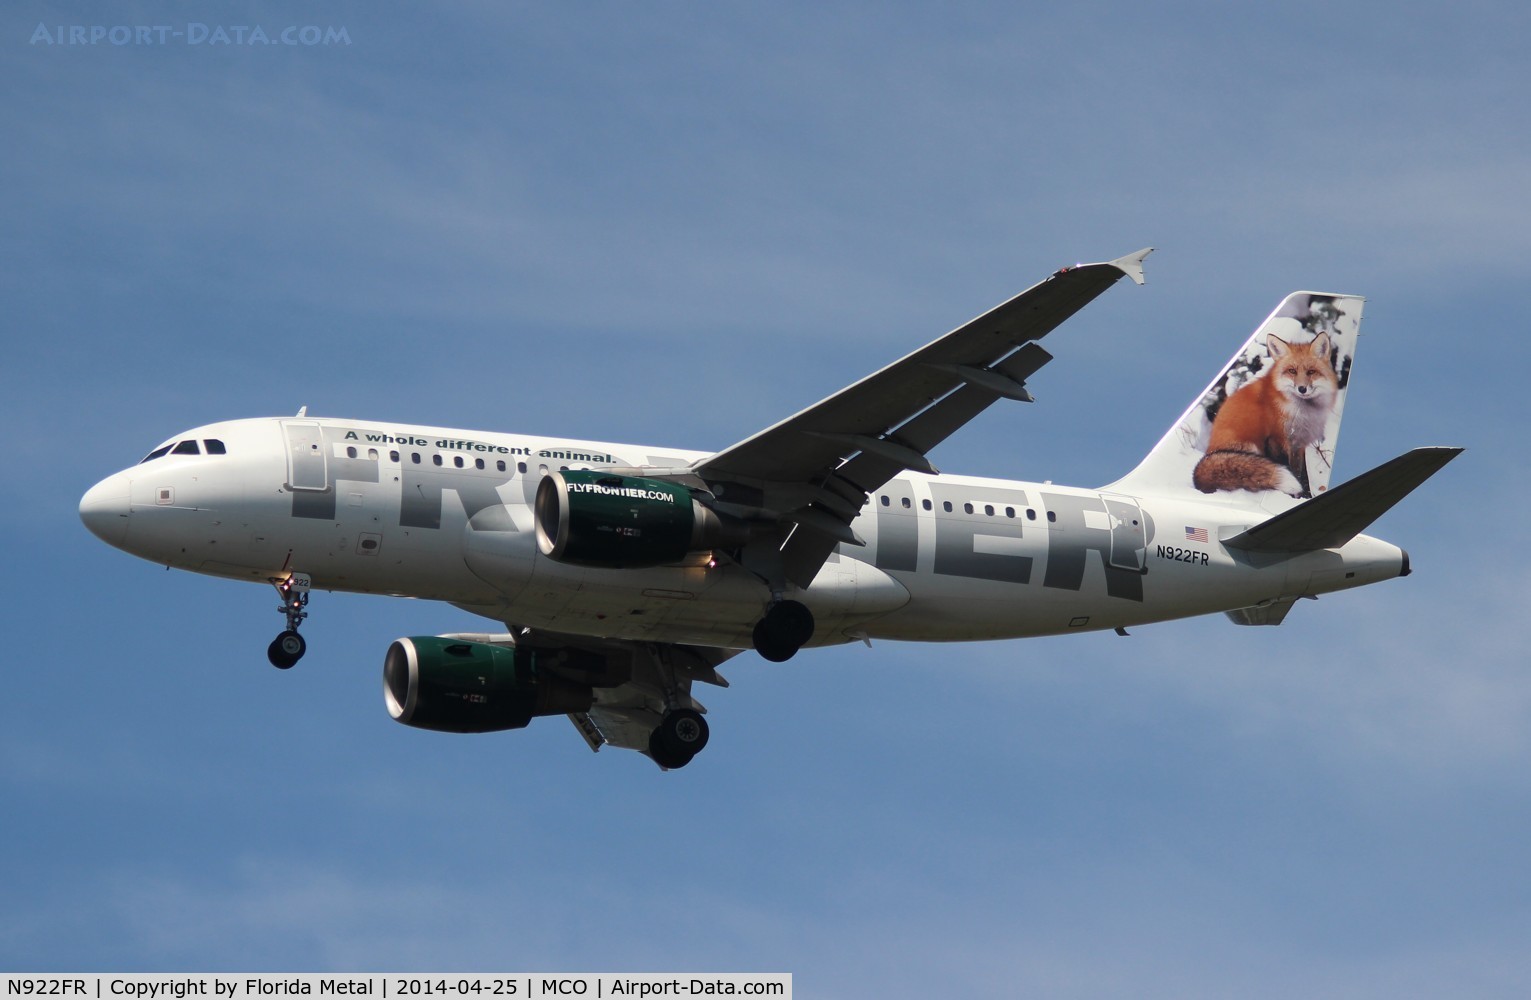 N922FR, 2003 Airbus A319-111 C/N 2012, Foxy the Red Fox Frontier A319